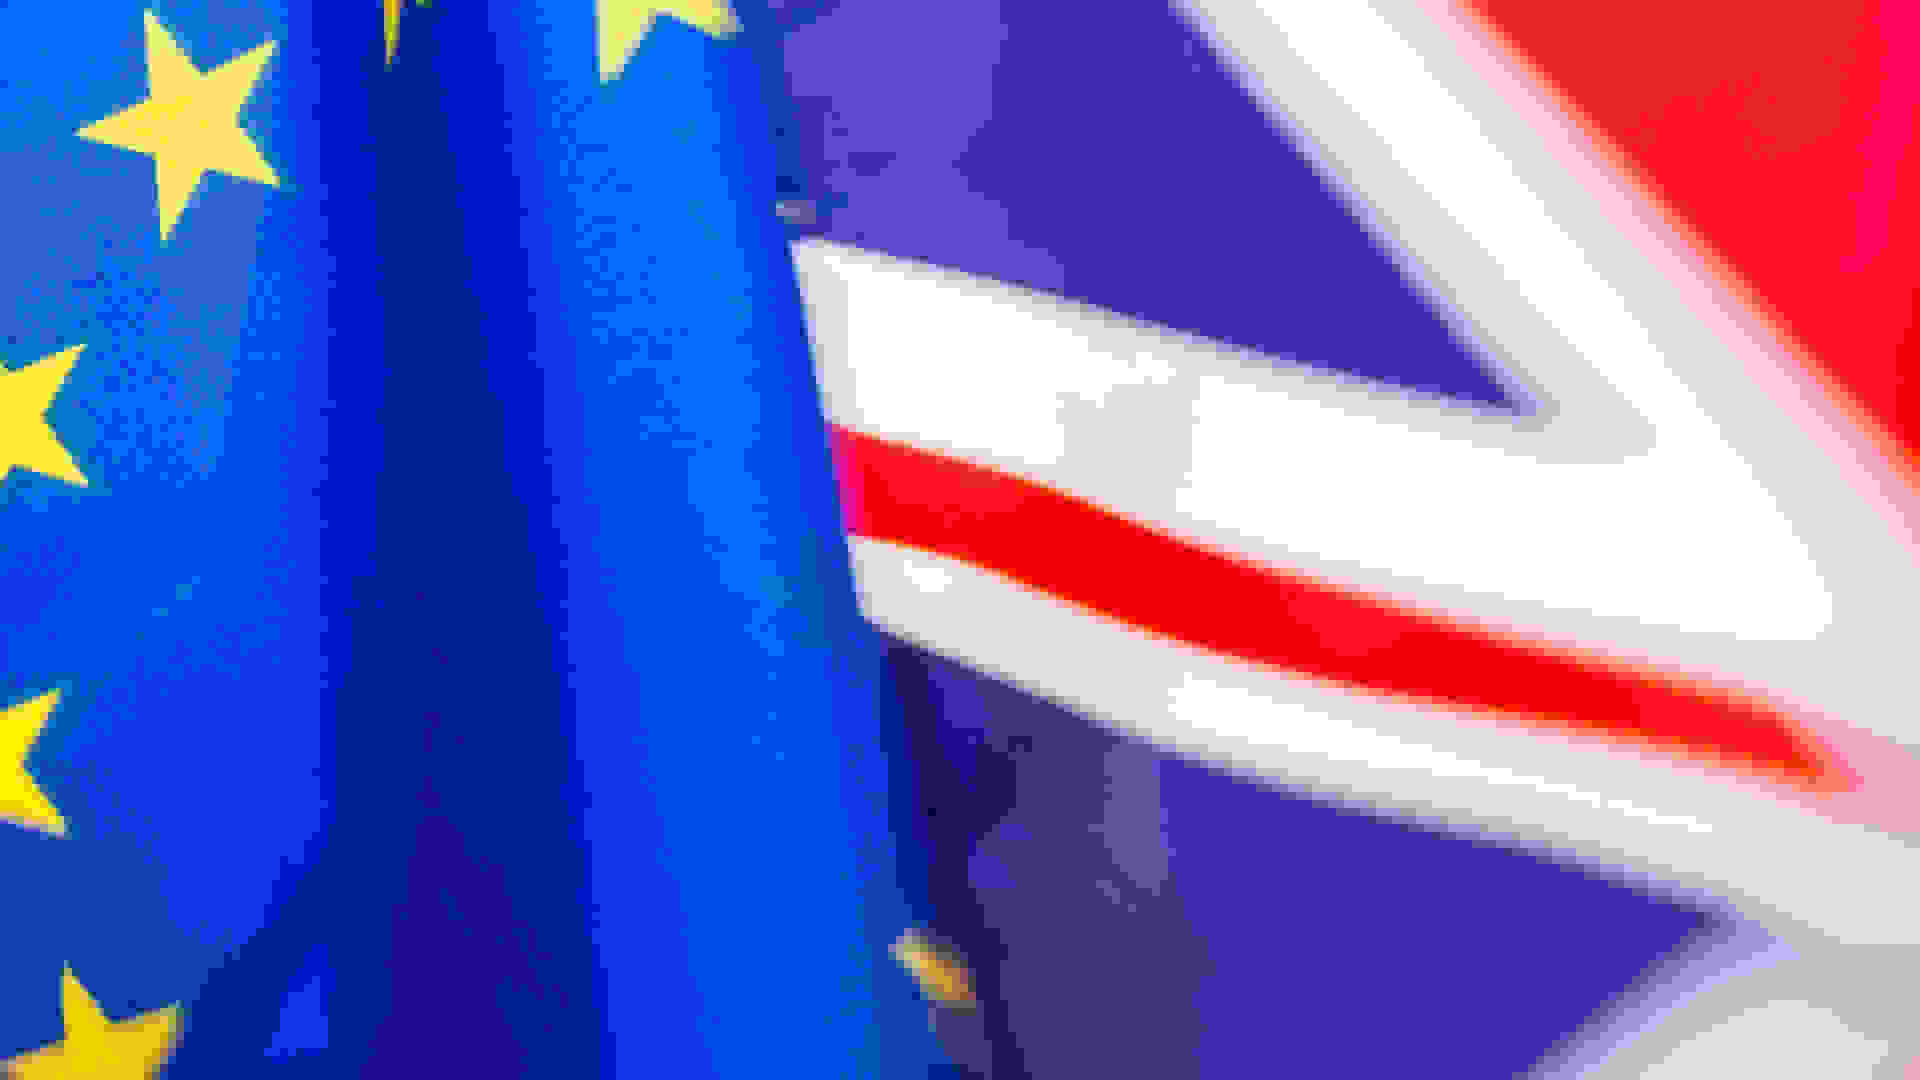 UK and EU flags next to each other